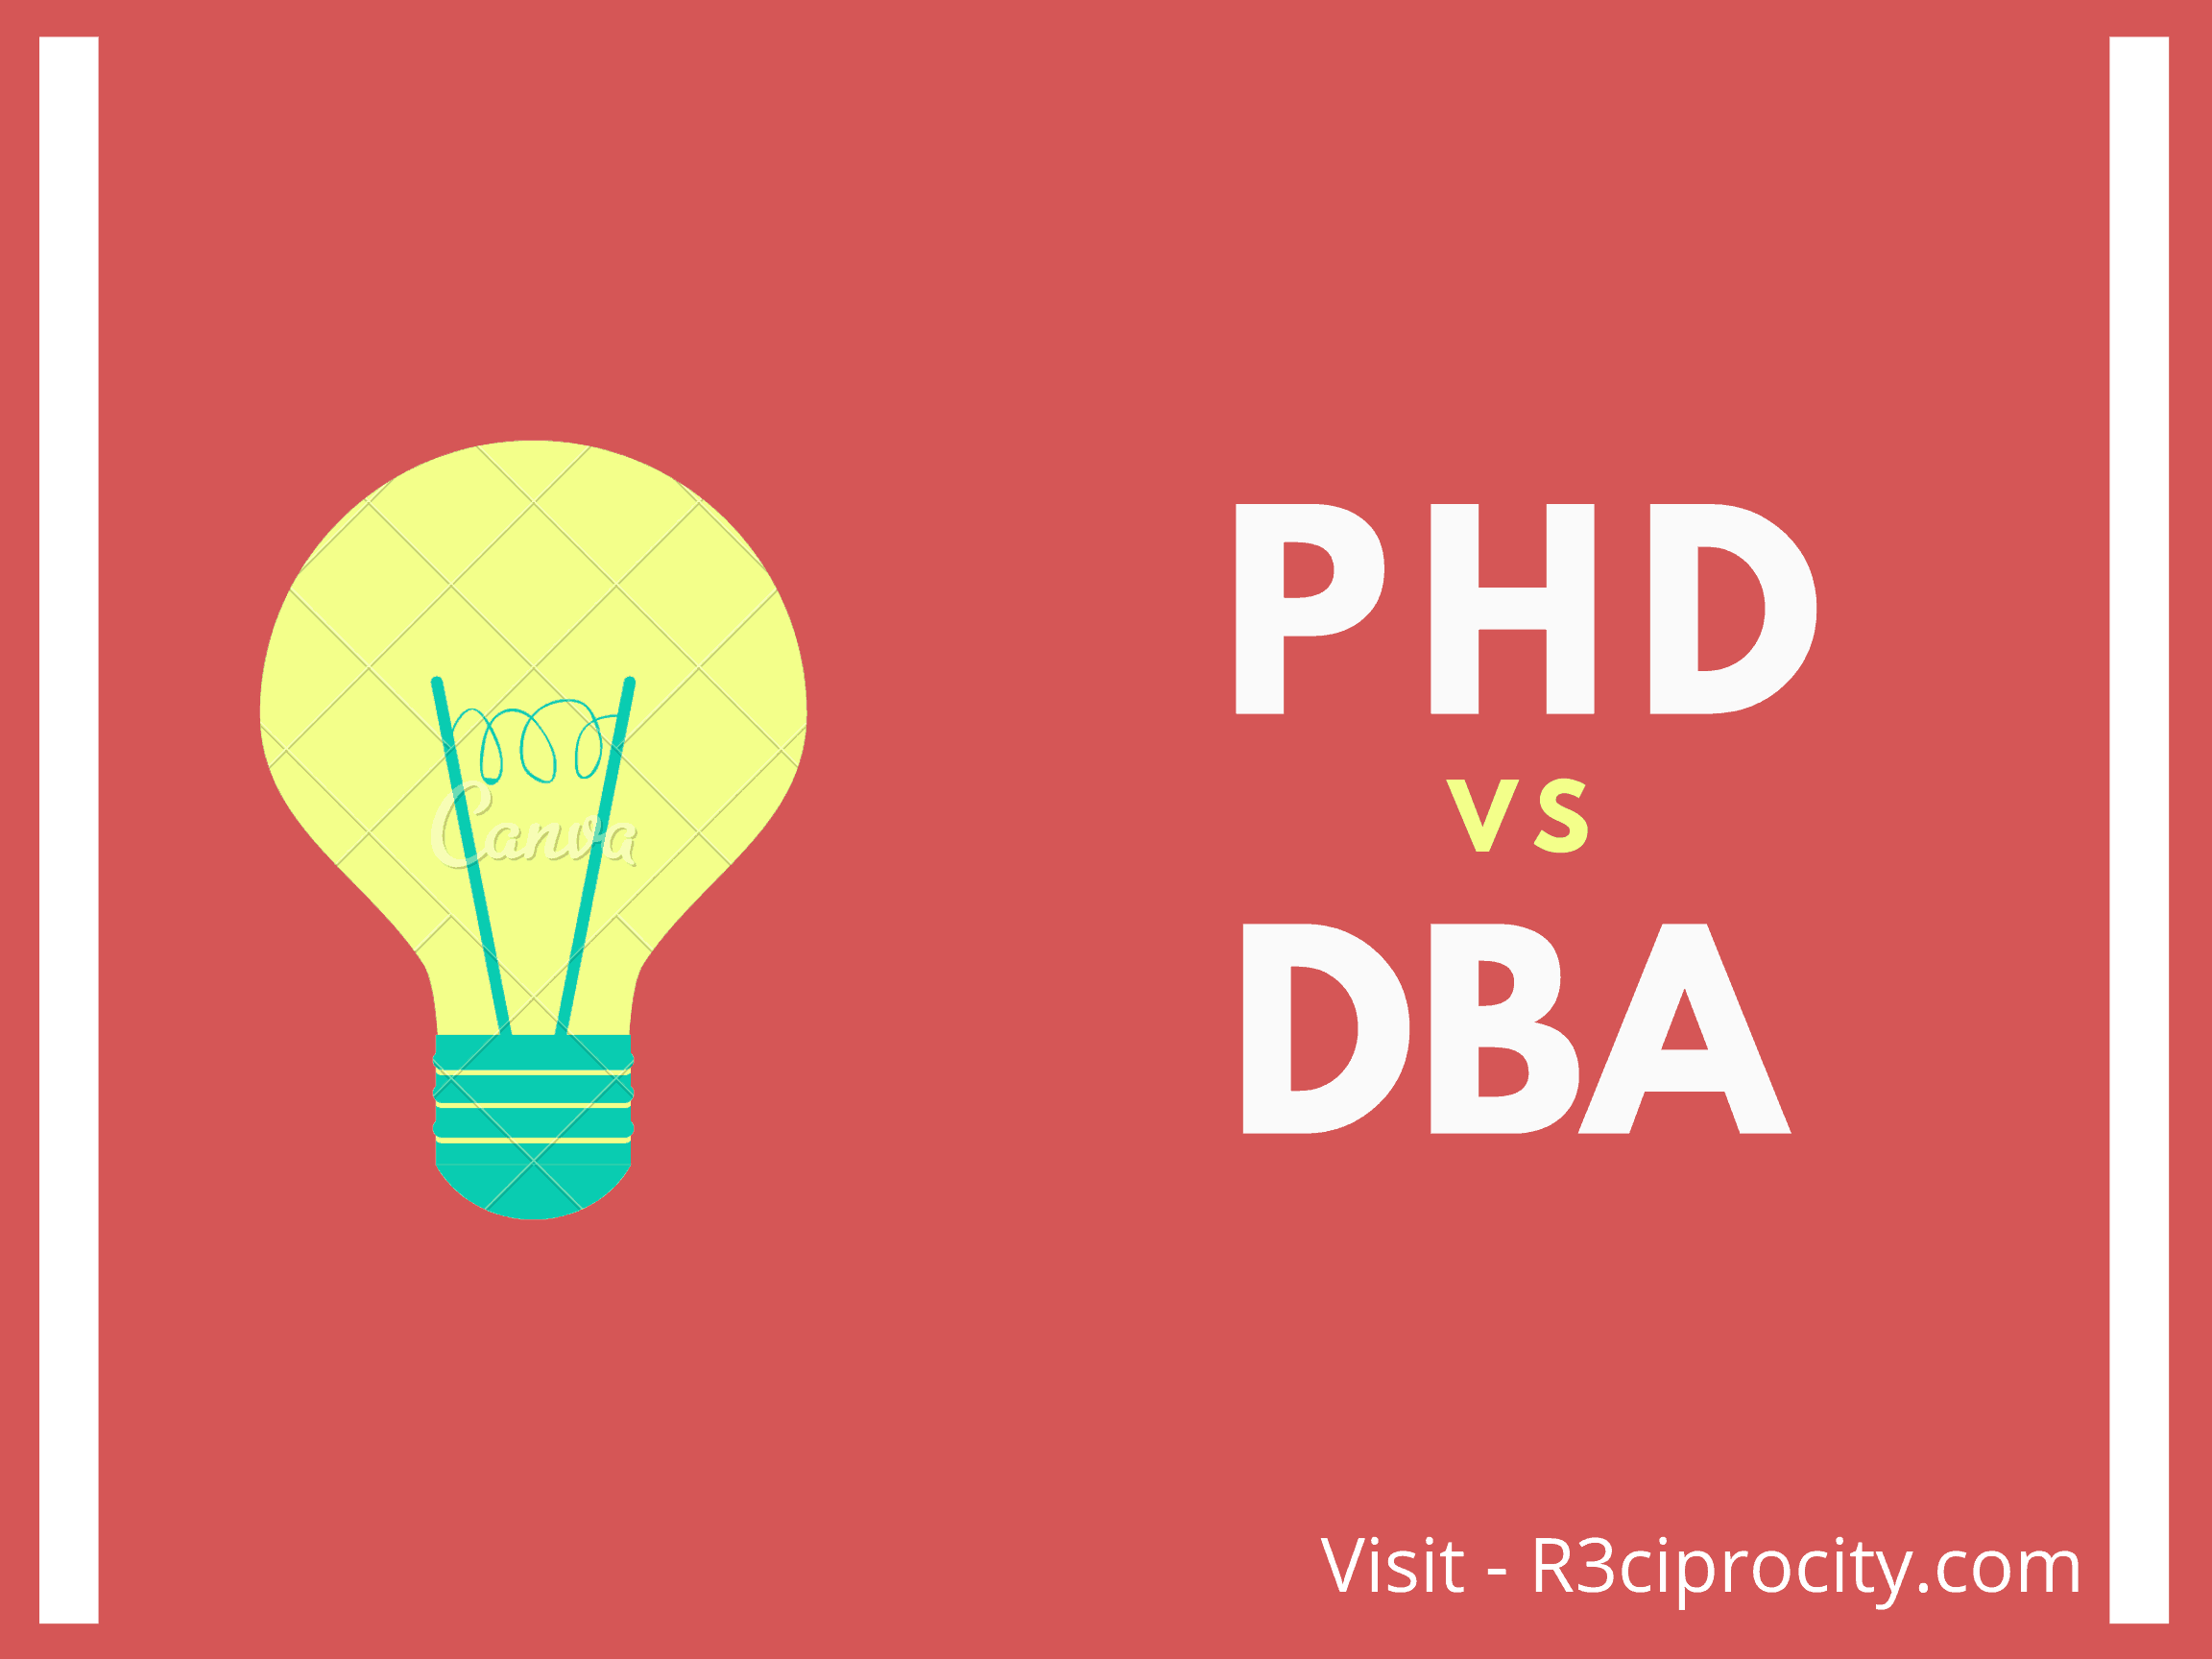 dba or phd in business